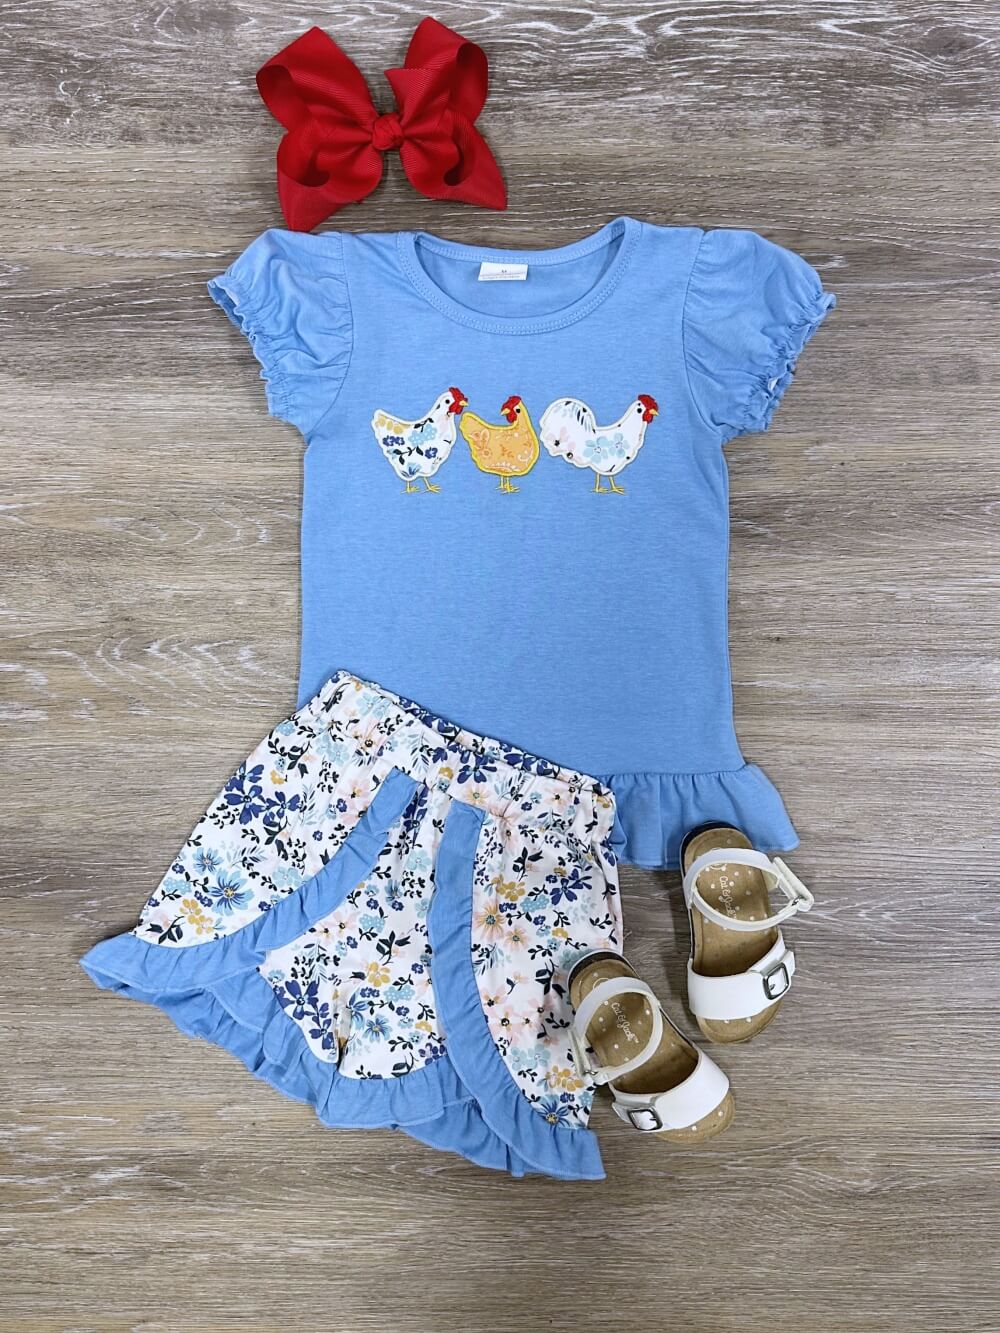 Blue Floral Chick Chick Chicken Girls Shorts Outfit